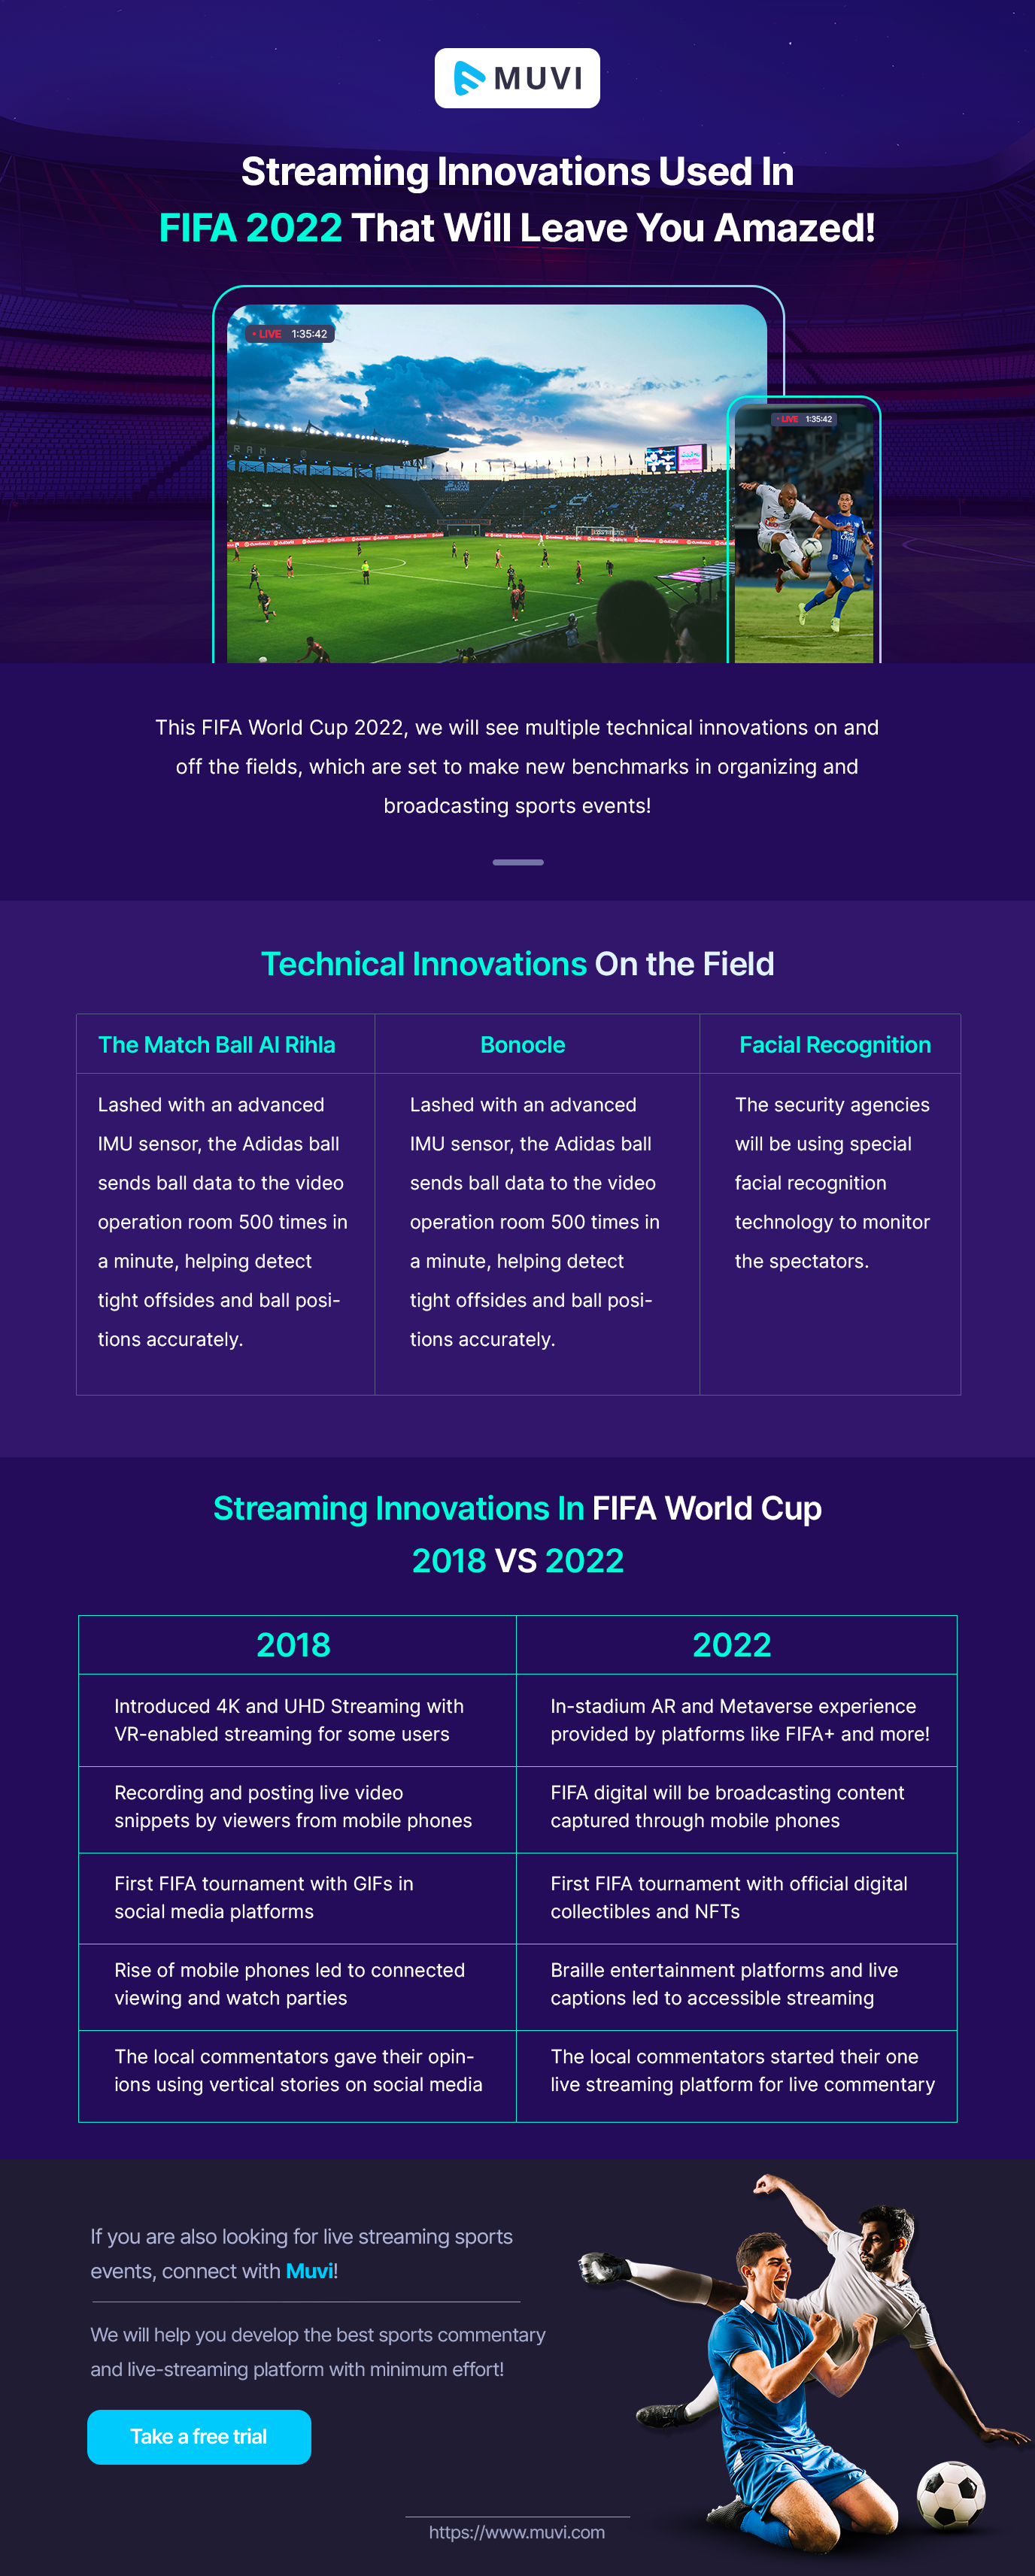 Streaming Innovations Used In FIFA 2022 